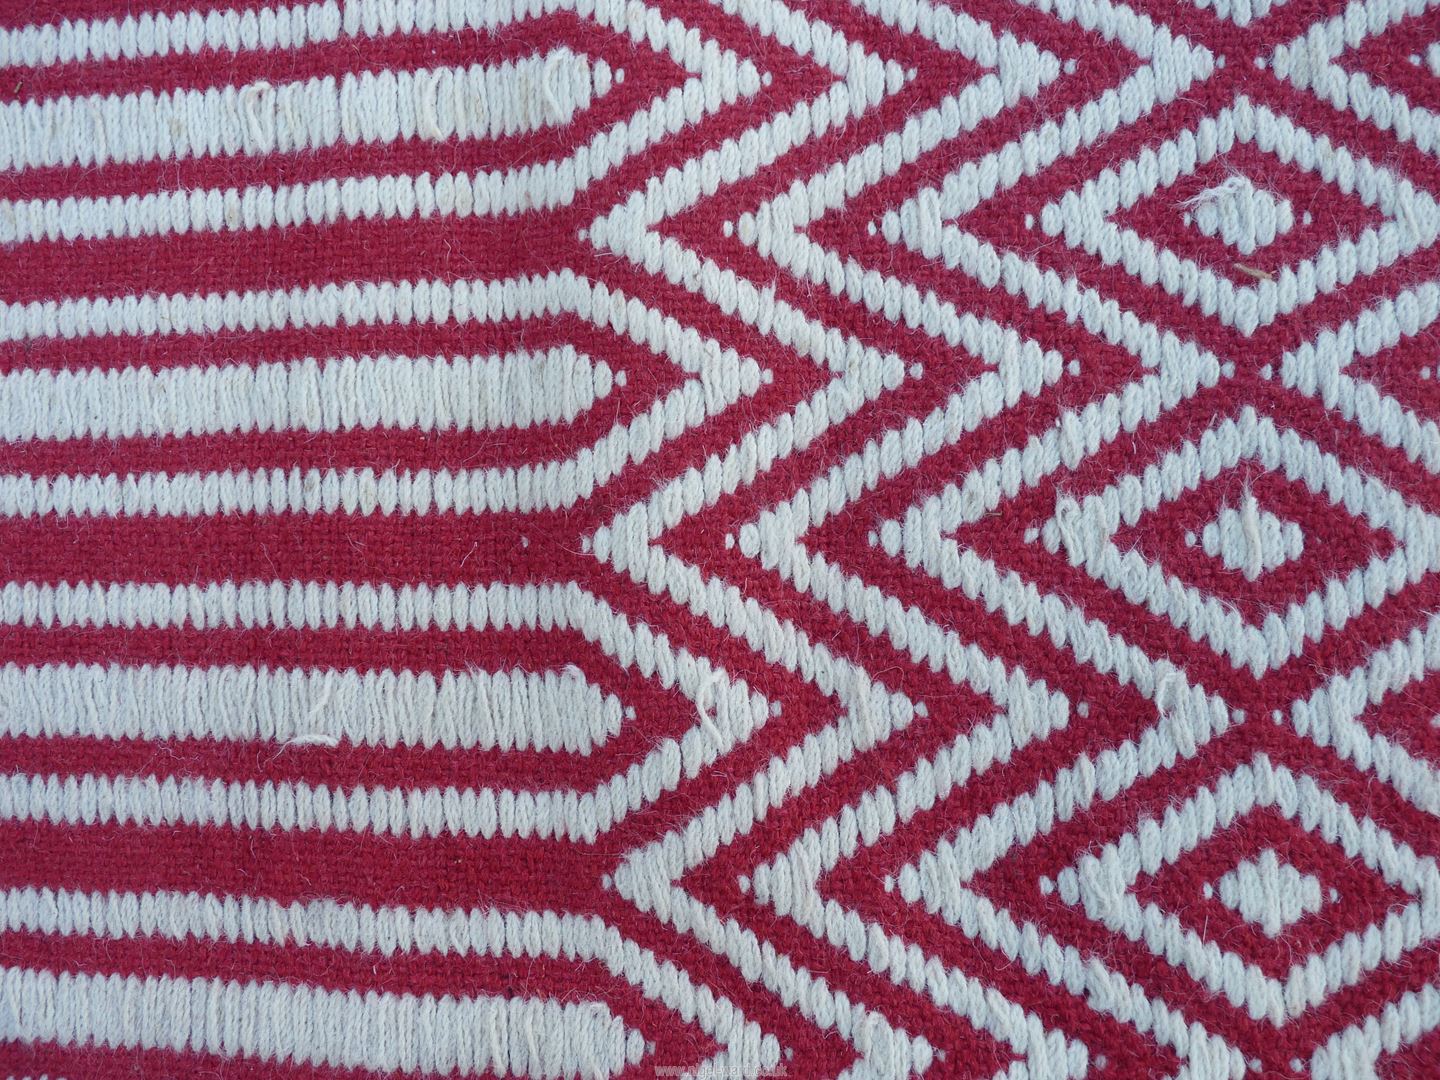 A red and white wool hearth rug, zig-zag and diamond patterns, 63" x 28", some stitching loose. - Image 2 of 3